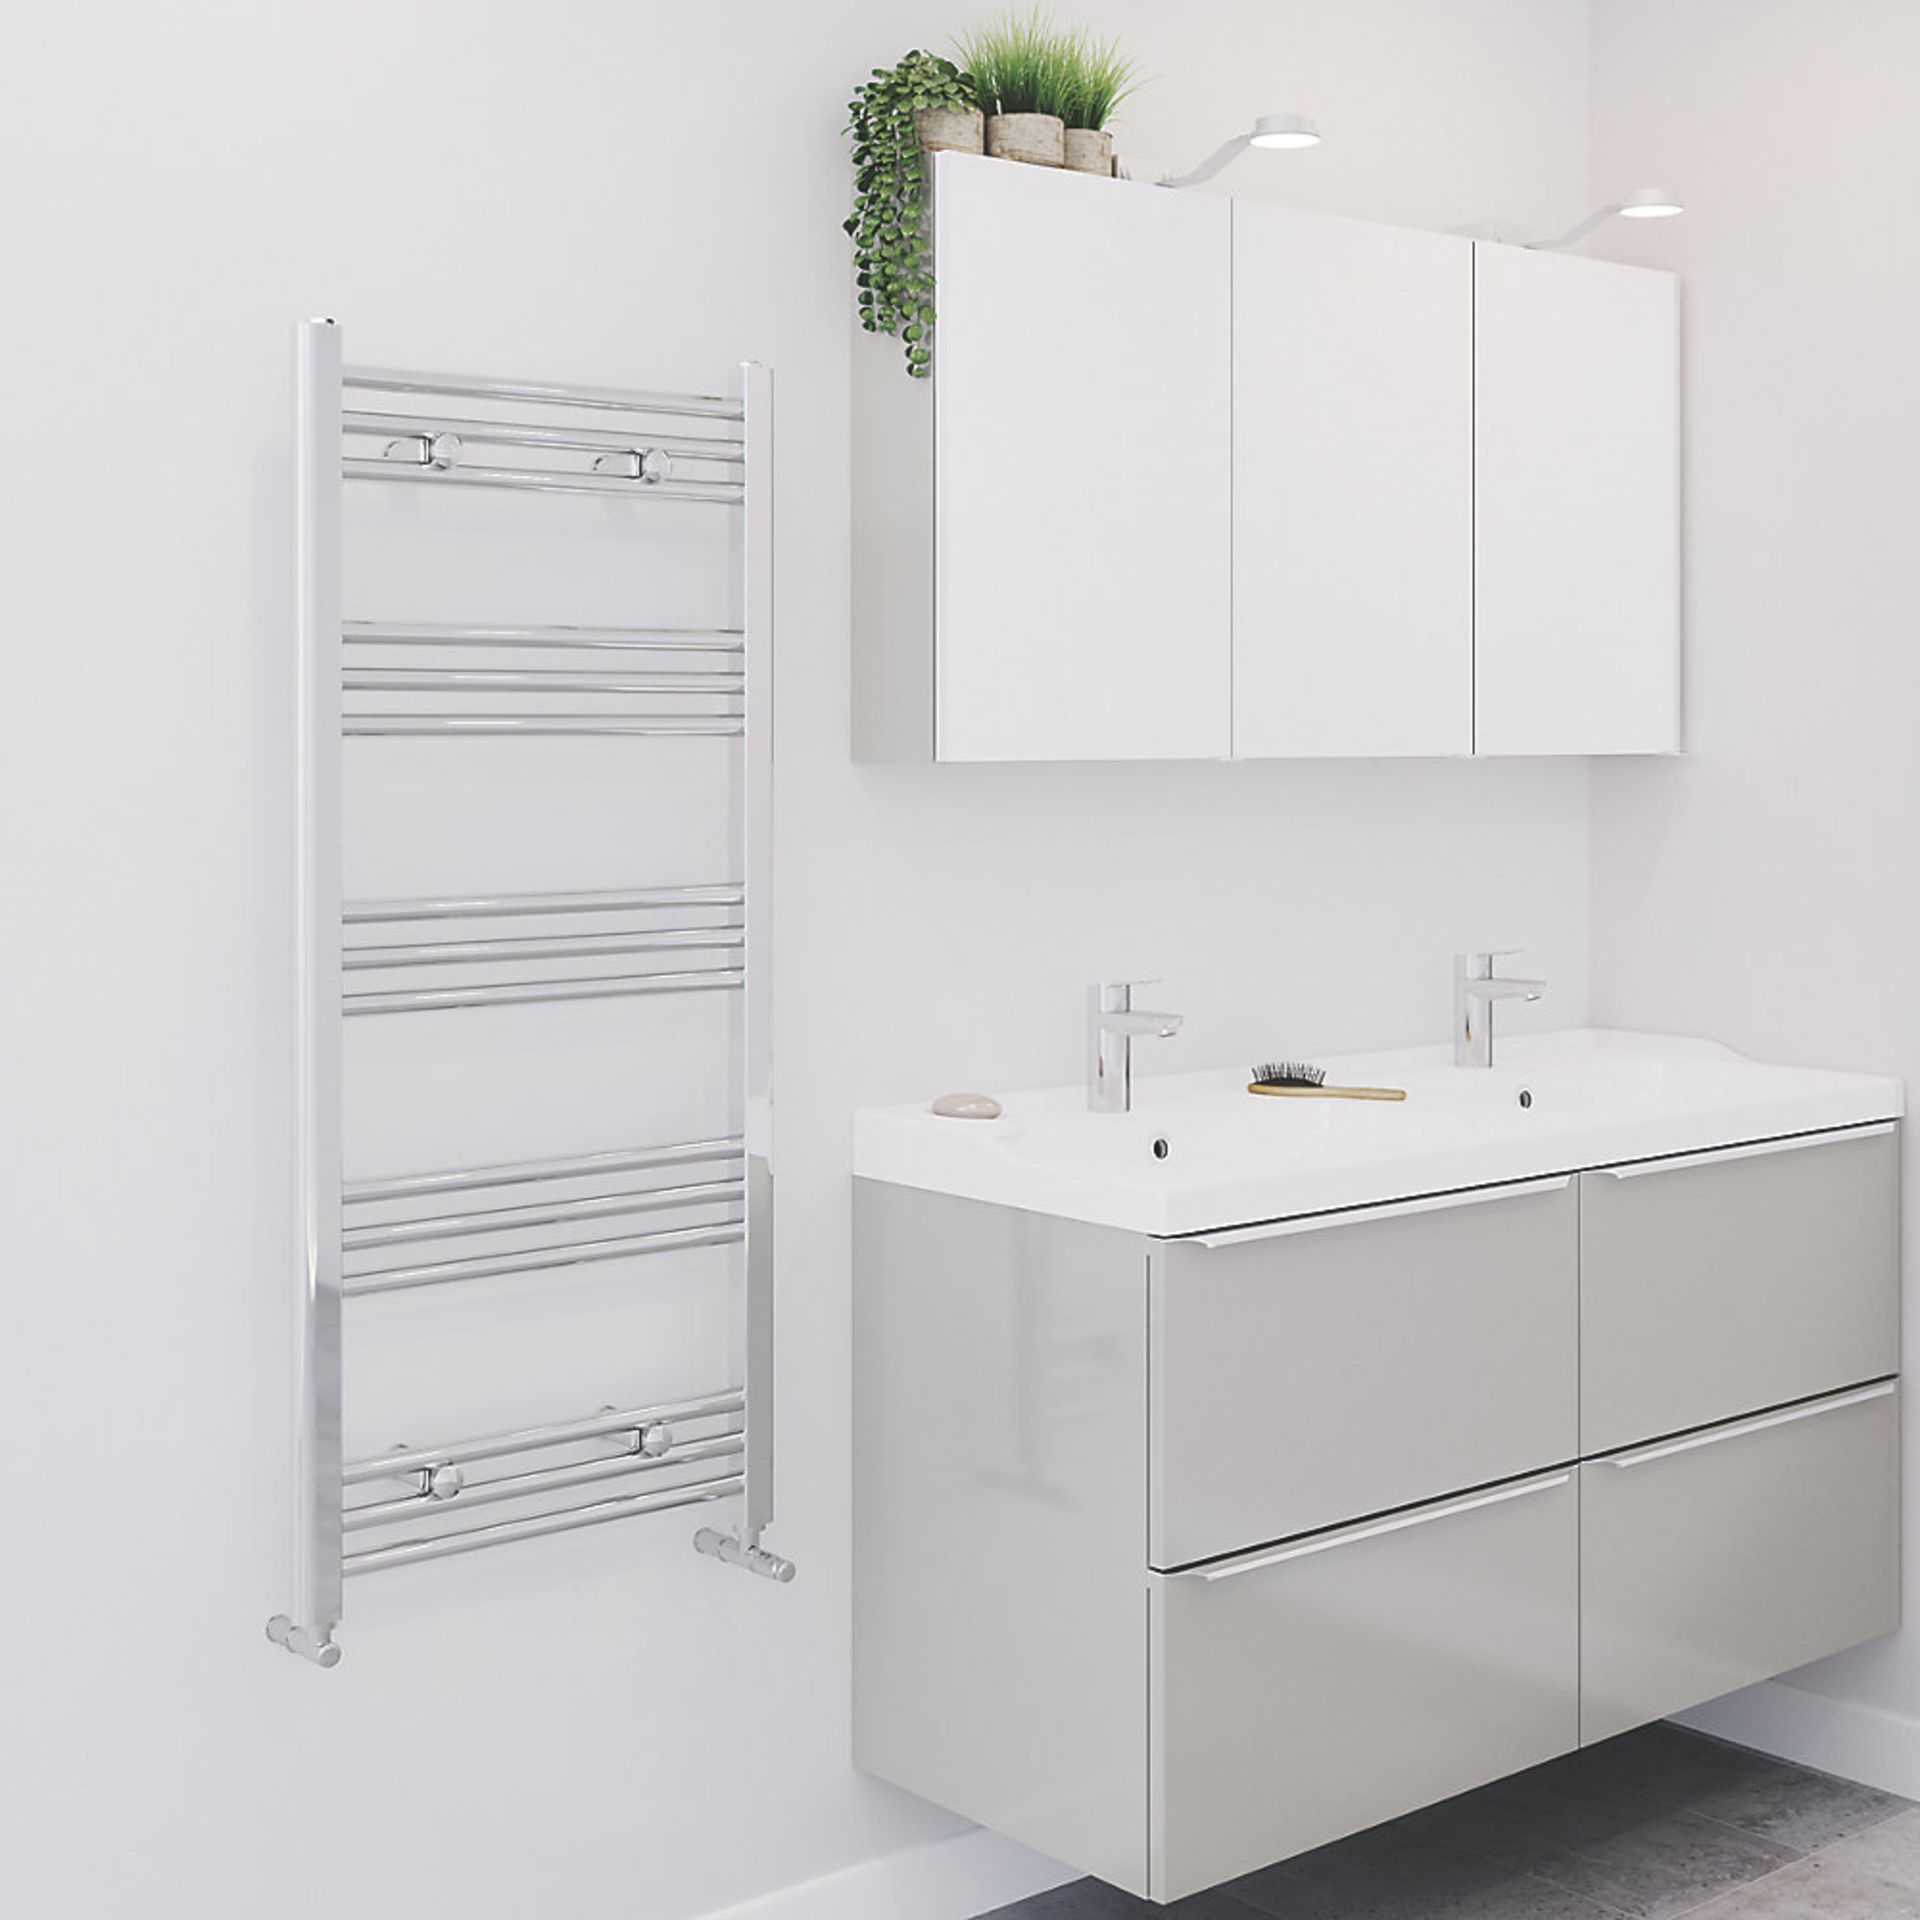 (SA149) 1100 X 500MM TOWEL RADIATOR CHROME. Mild steel construction with a gloss chrome finish. This - Image 3 of 7